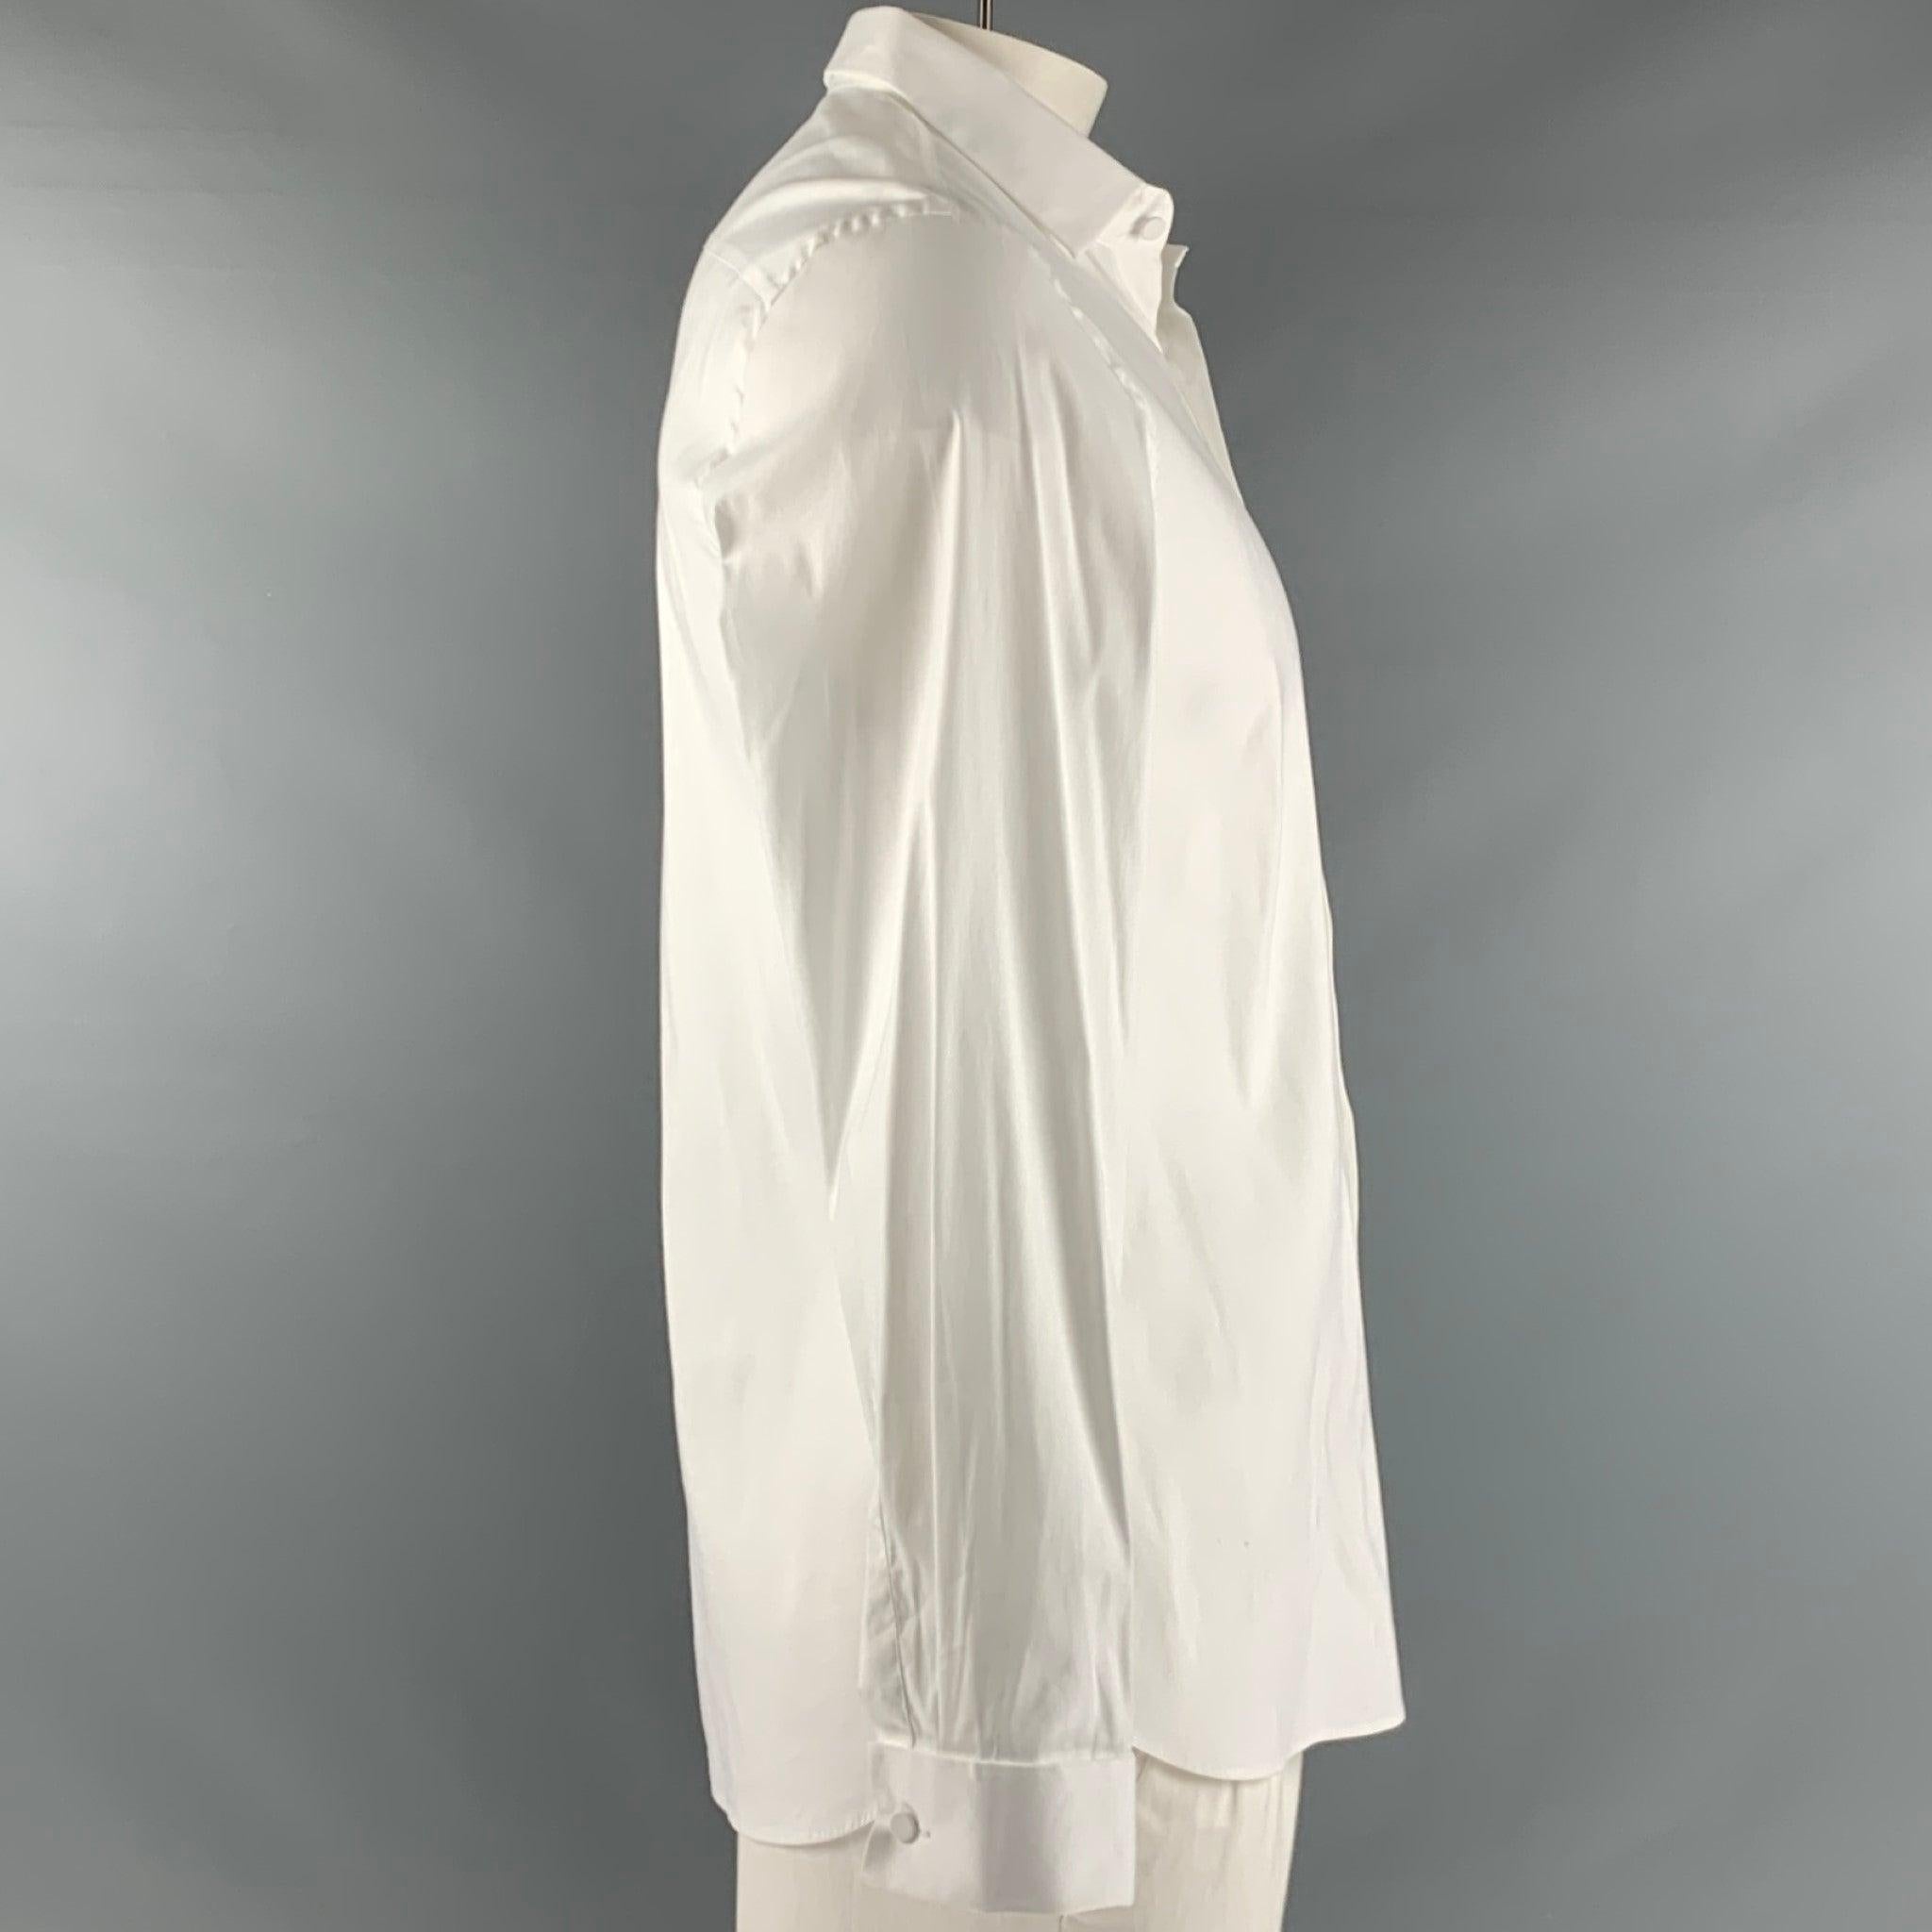 PRADA
long sleeve shirt in a white cotton blend featuring a French cuffs, a spread collar, and a buttoned closure. Made in Italy.Very Good Pre-Owned Condition. Minor signs of wear. 

Marked:   42/16.5 

Measurements: 
 
Shoulder: 18 inches Chest: 42